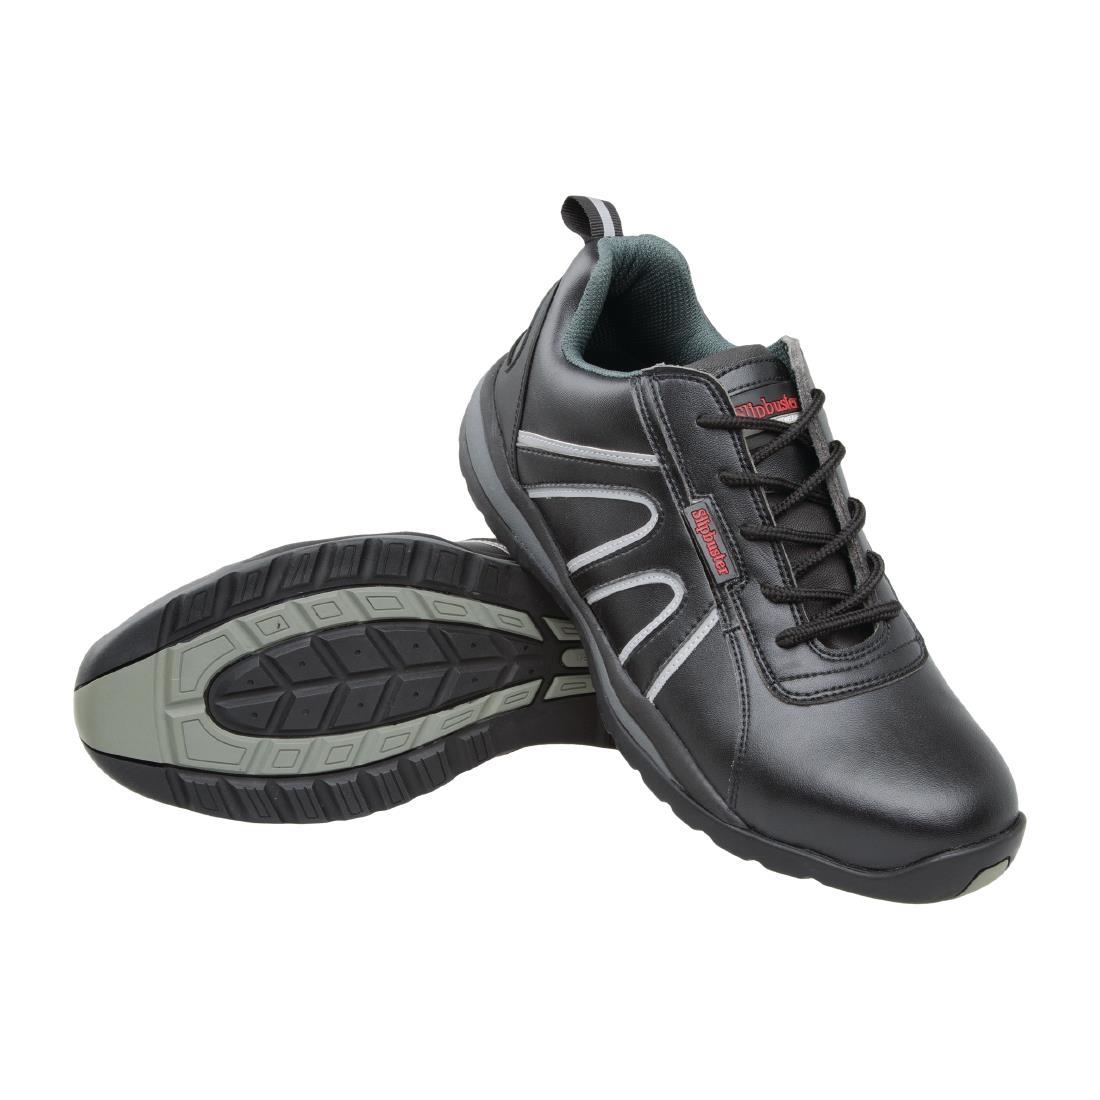 Slipbuster Safety Trainers Black 36 - A708-36  - 2